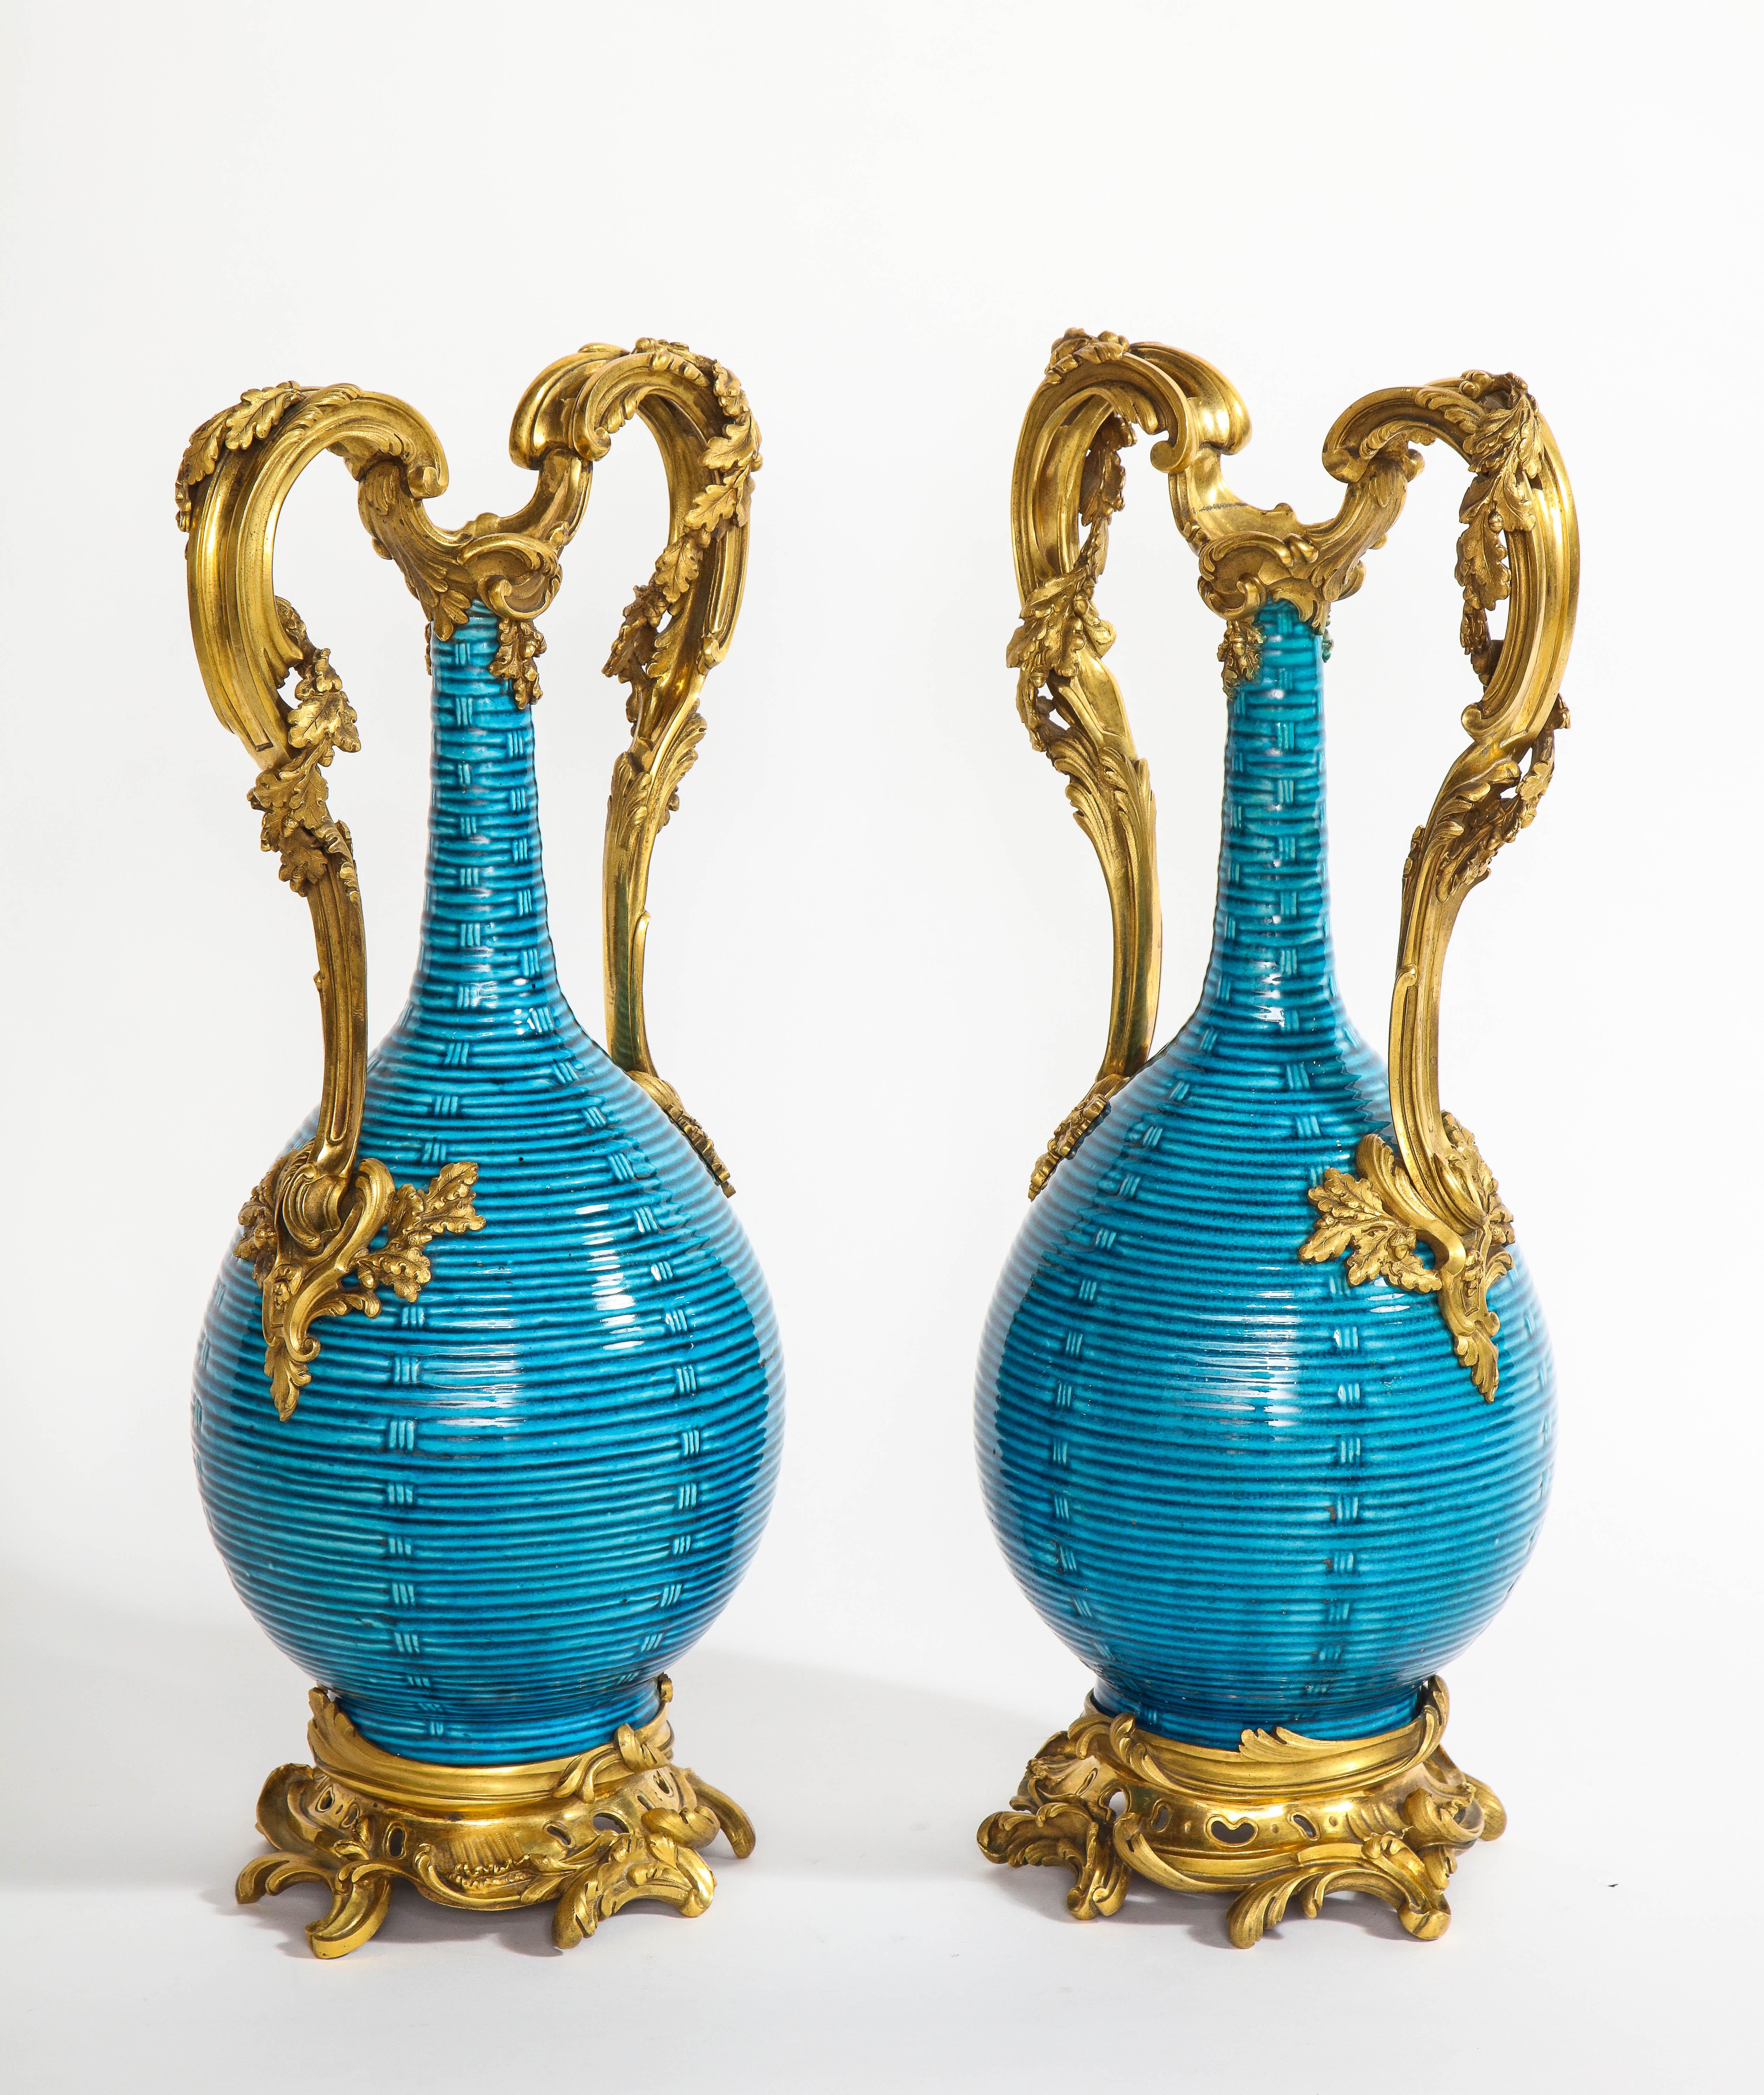 A magnificent and exceptional pair of massive antique French 18th century Louis XV period doré bronze and Chinese Turquoise ground porcelain hand engraved basket weave form vases. The porcelain, Chinese and first half of 18th century and the ormolu,